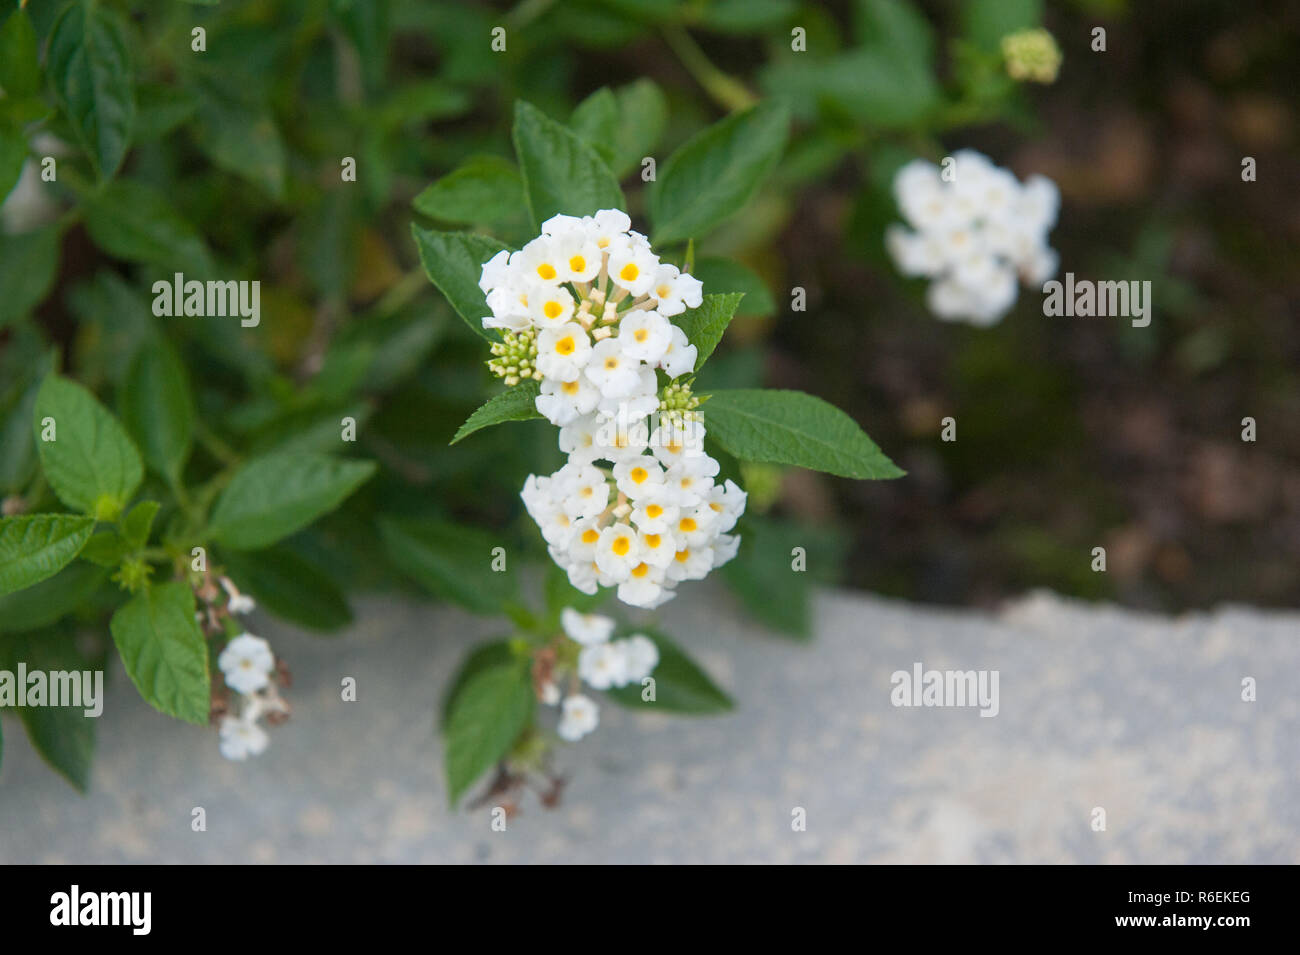 A white small head flower Stock Photo